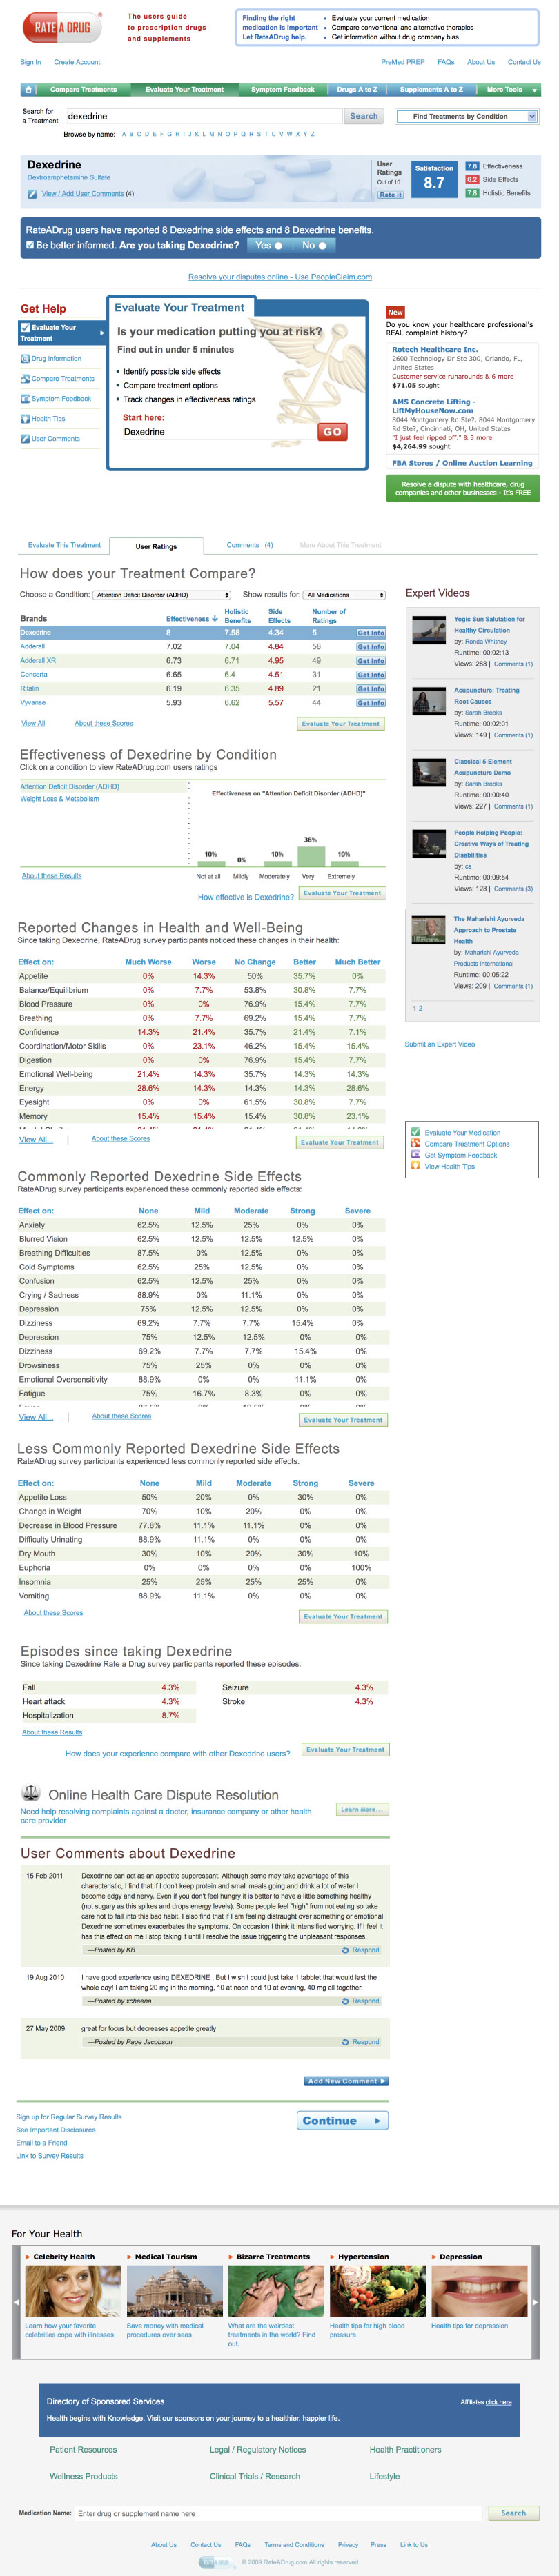 Rate a Drug Survey Results Page